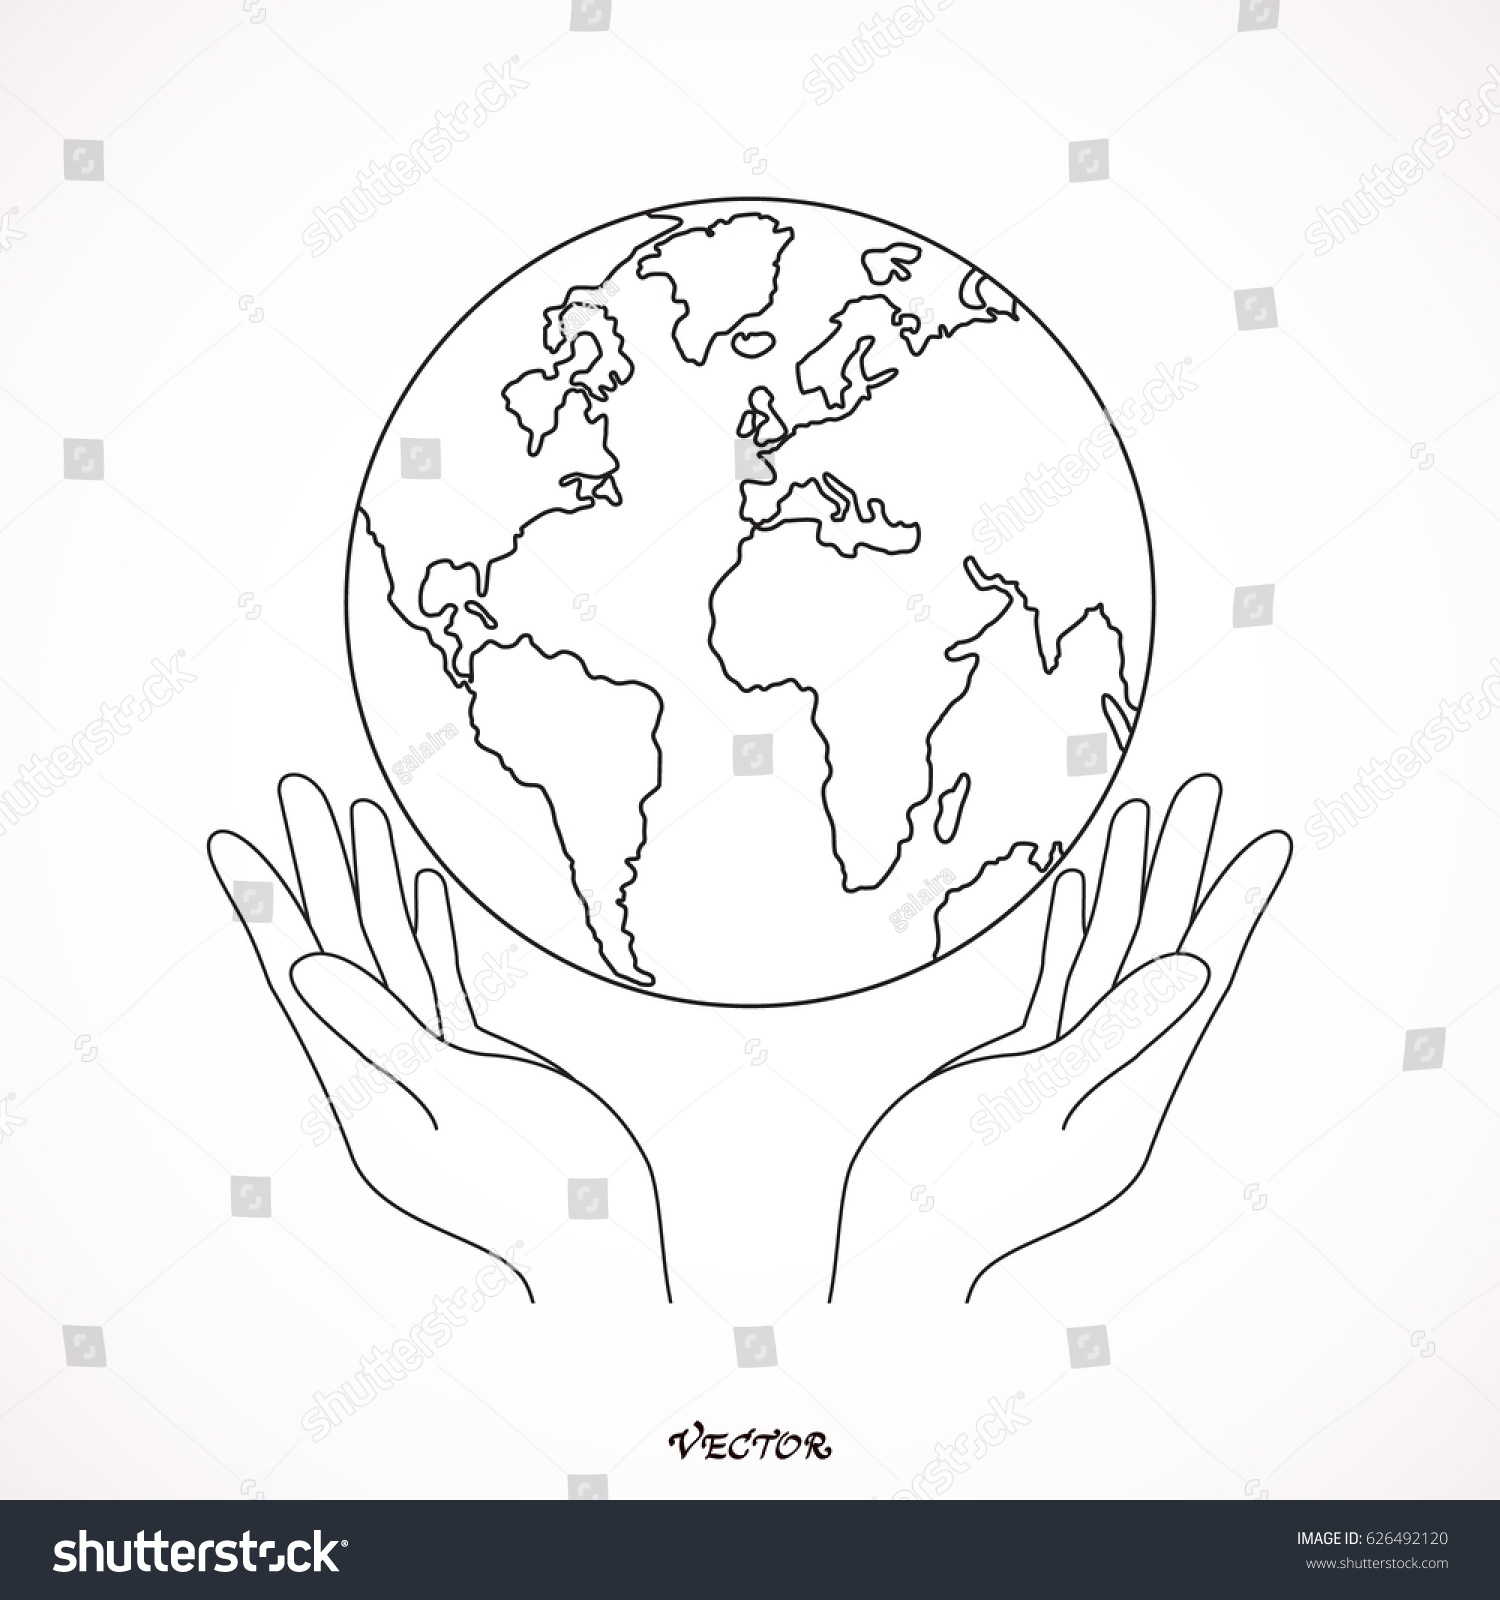 1500x1600 Collection Of Holding Earth In Hands Drawing High Quality.